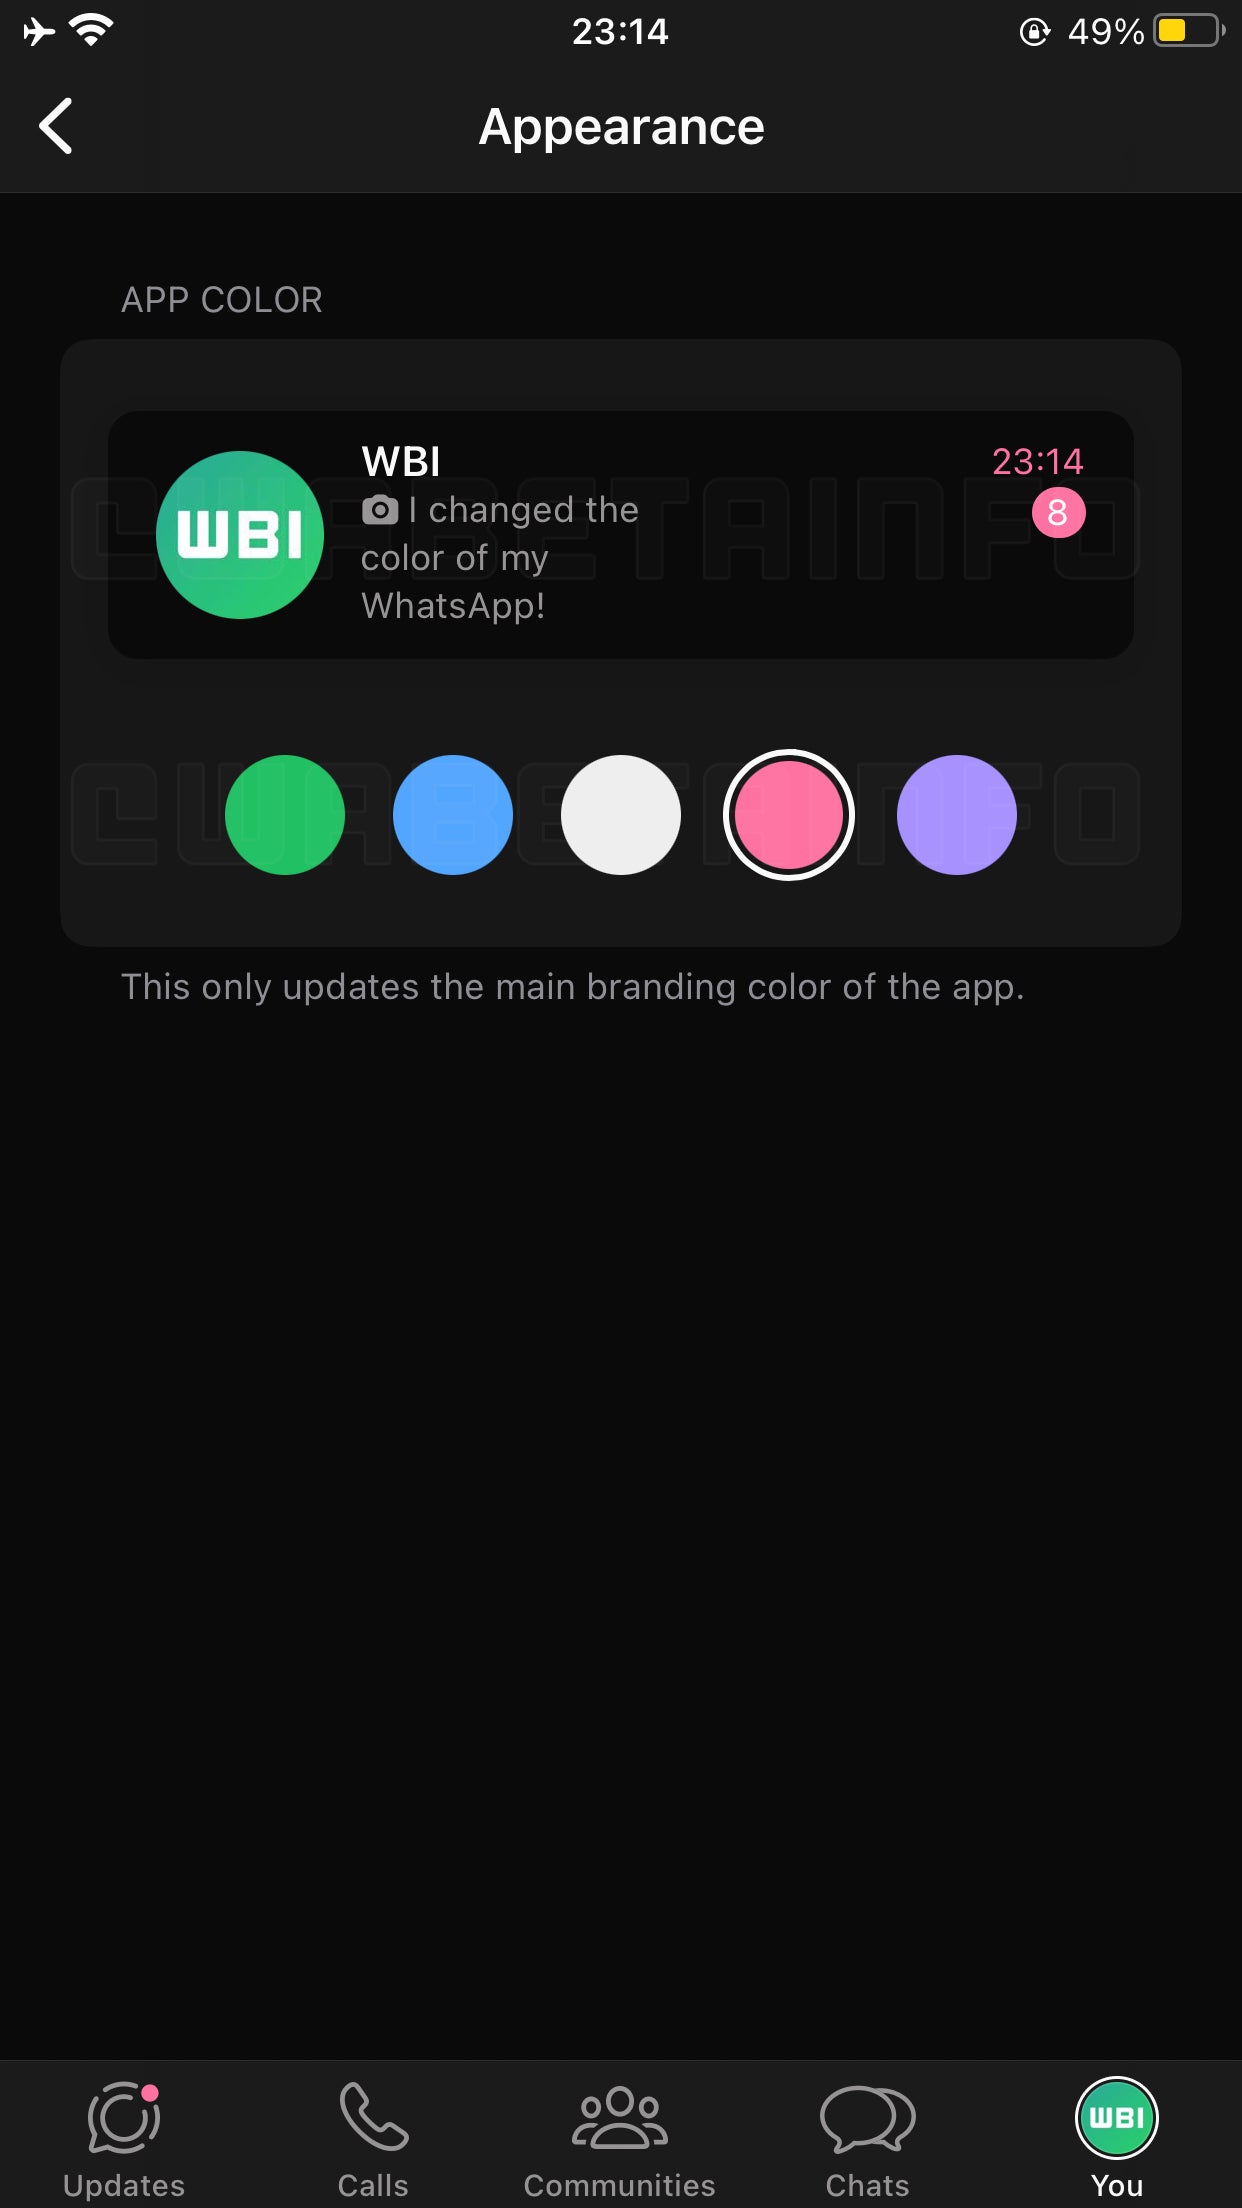 Soon you will be able to paint your WhatsApp any color you want, as long as it is green, blue, white, pink or purple